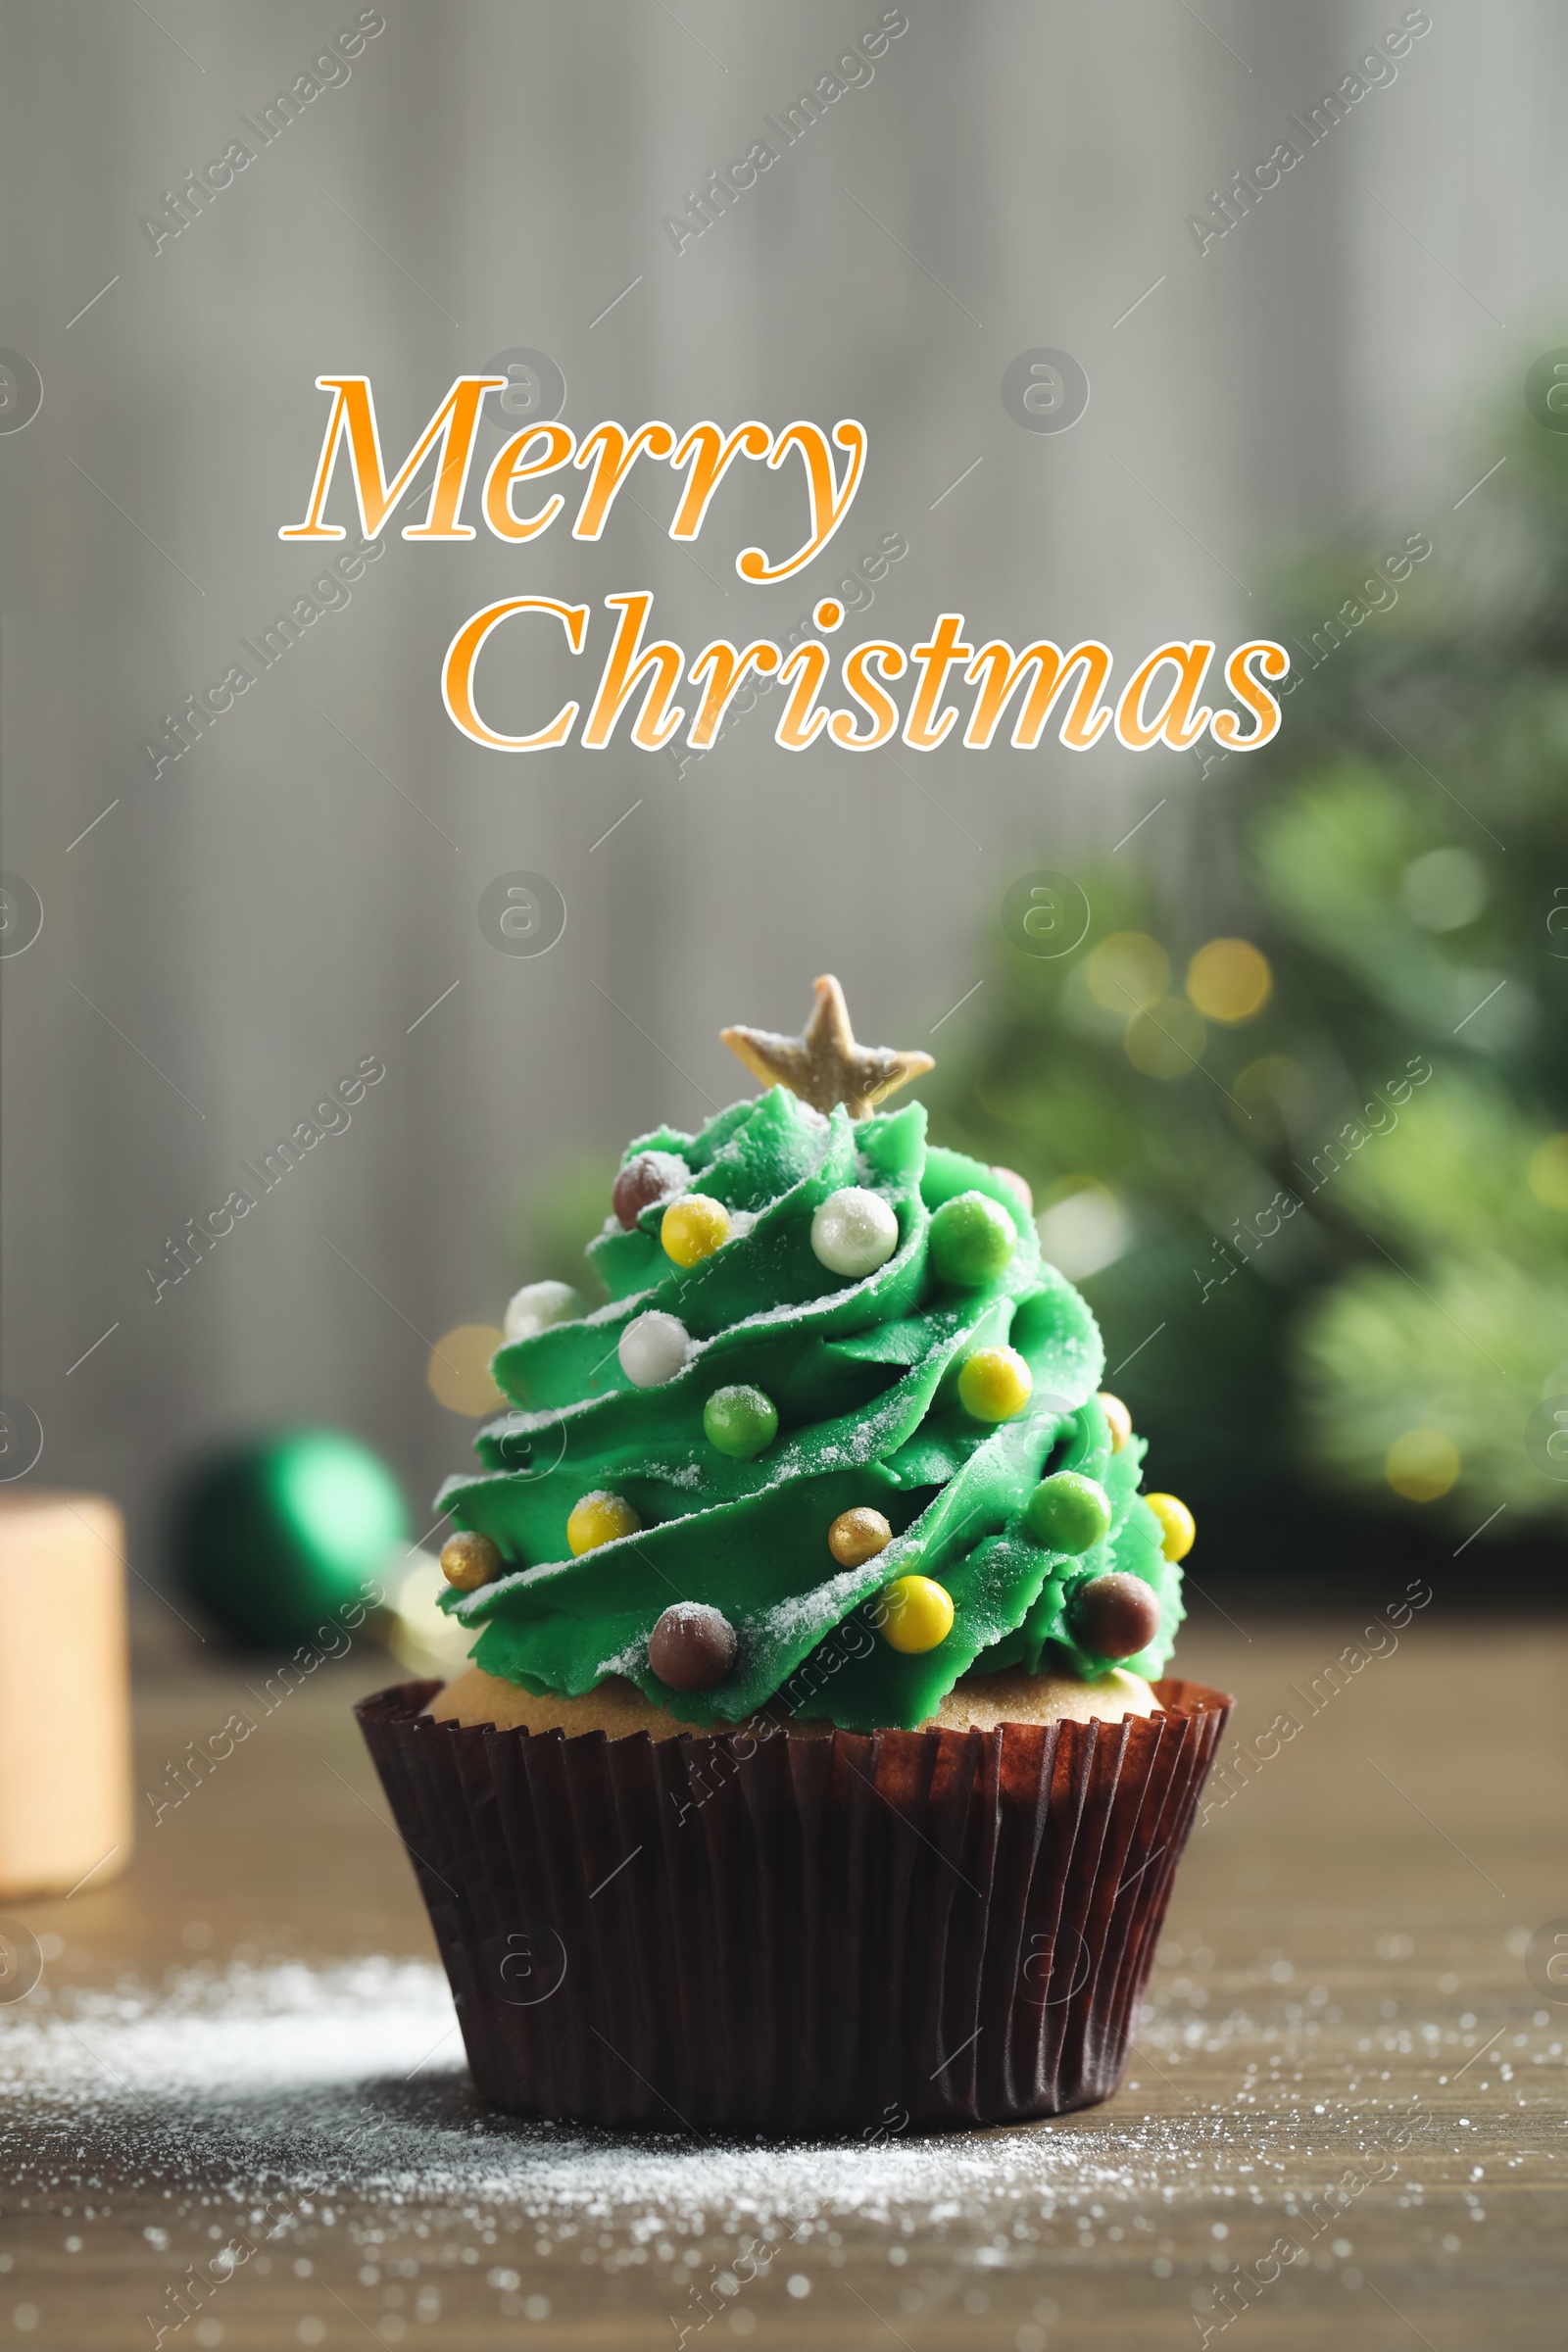 Image of Greeting card with phrase Merry Christmas. Festively decorated cupcake on wooden table